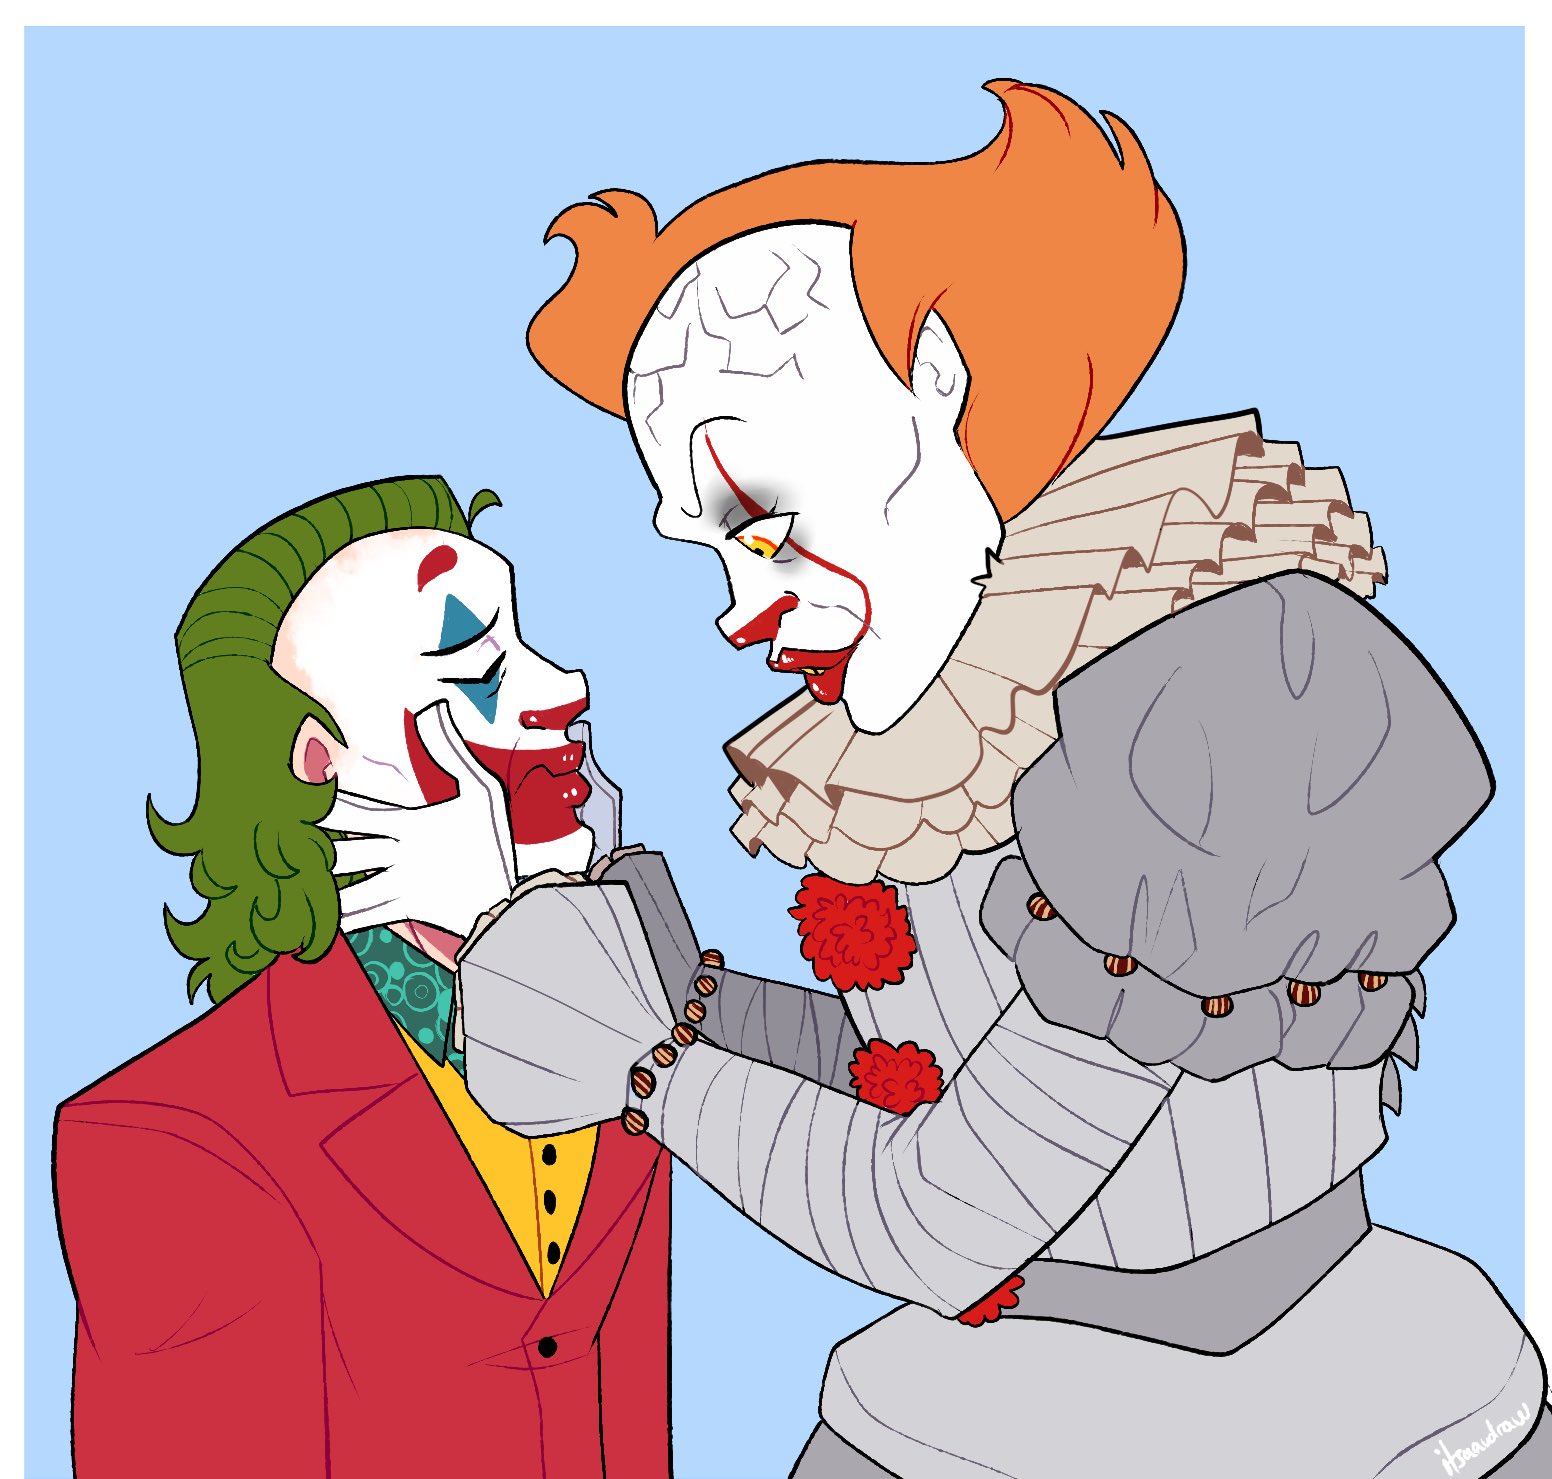 And you have my pity. #joker #Pennywise” .